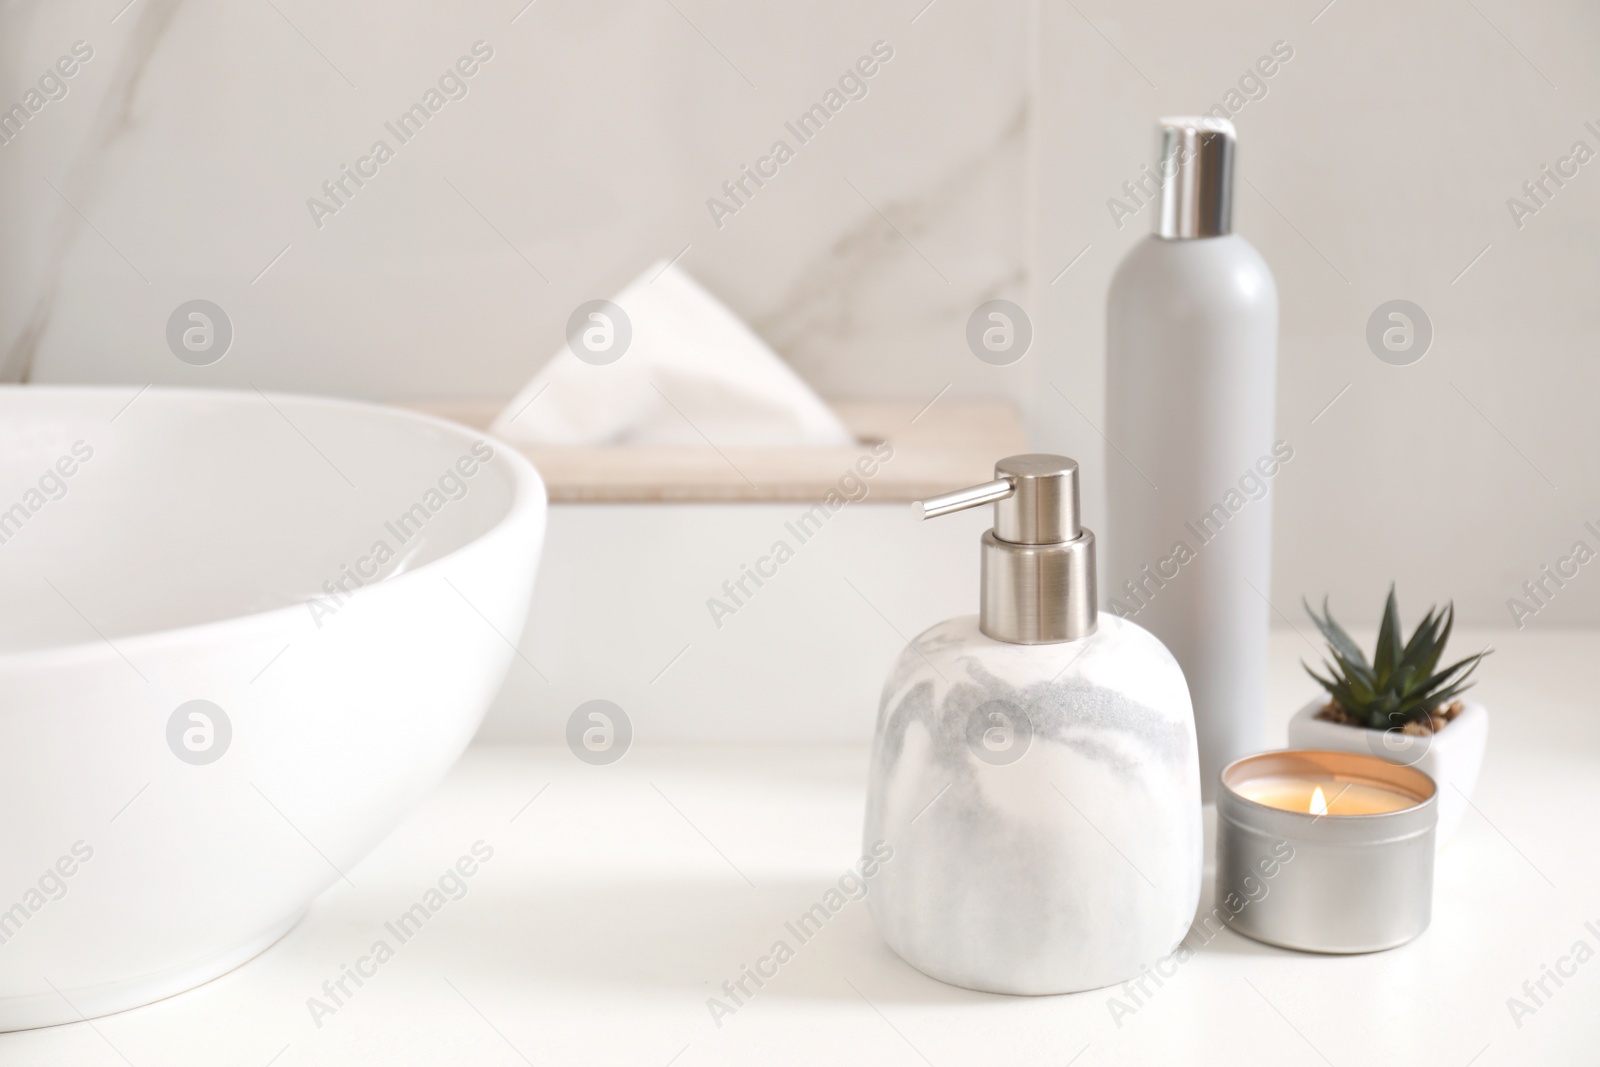 Photo of Toiletries, burning candle and plant near vessel sink in bathroom